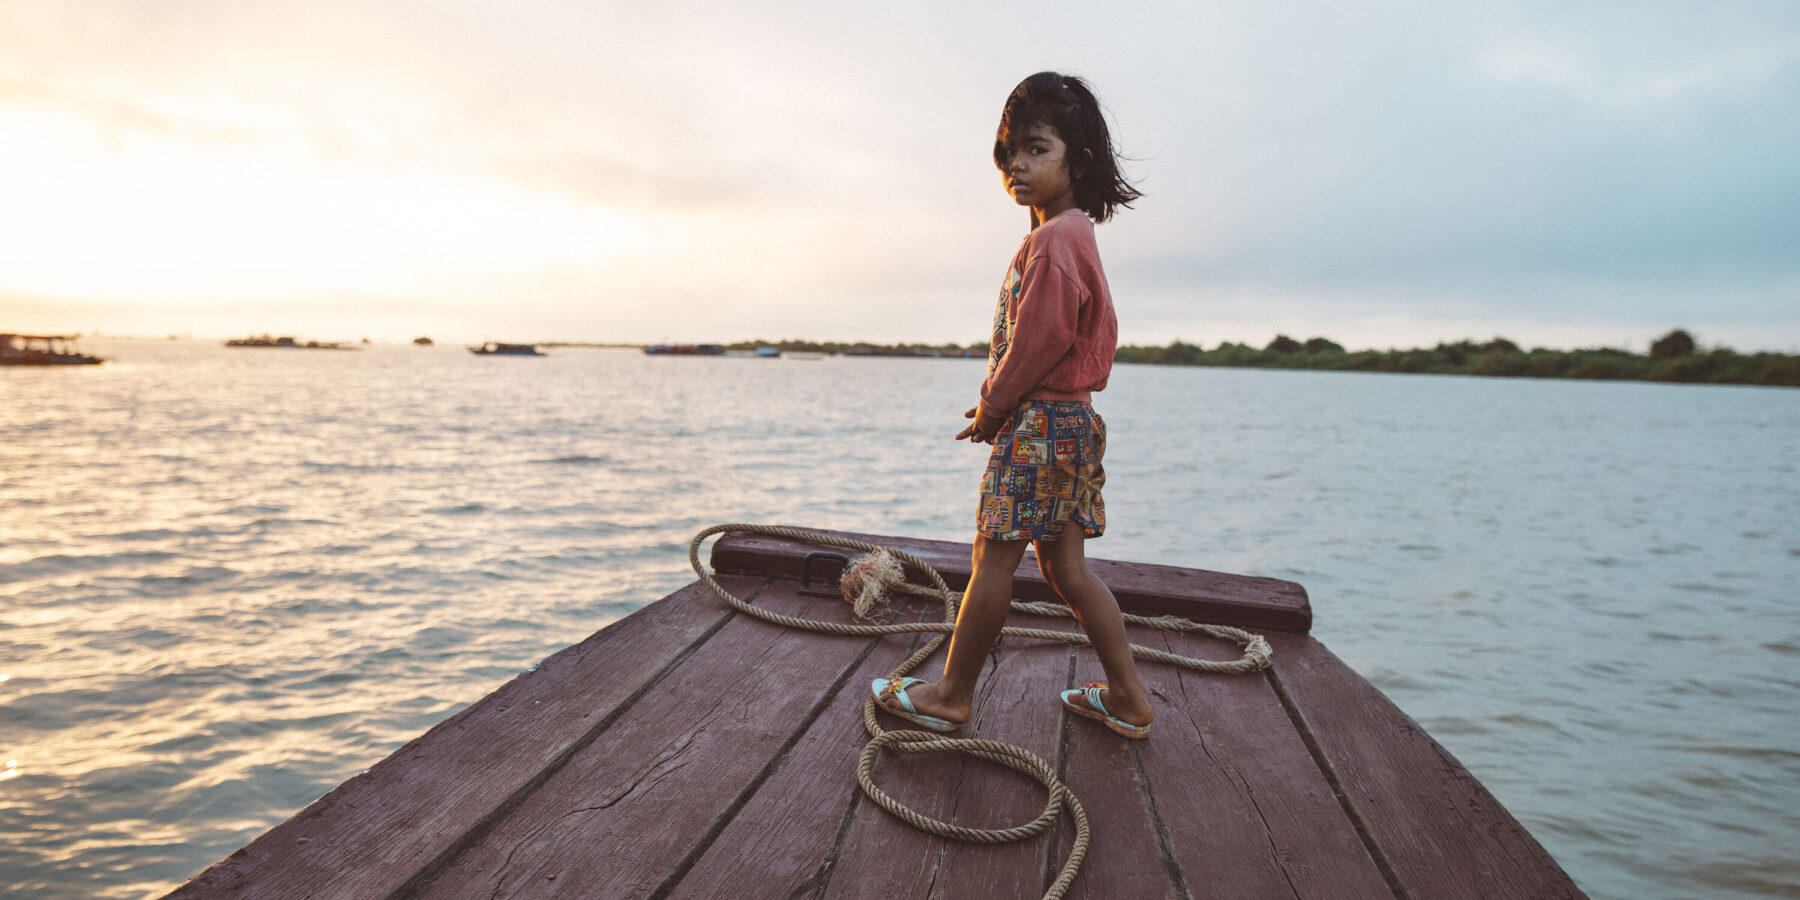 Child stood on boat on the Tonle Sap Lake in Cambodia